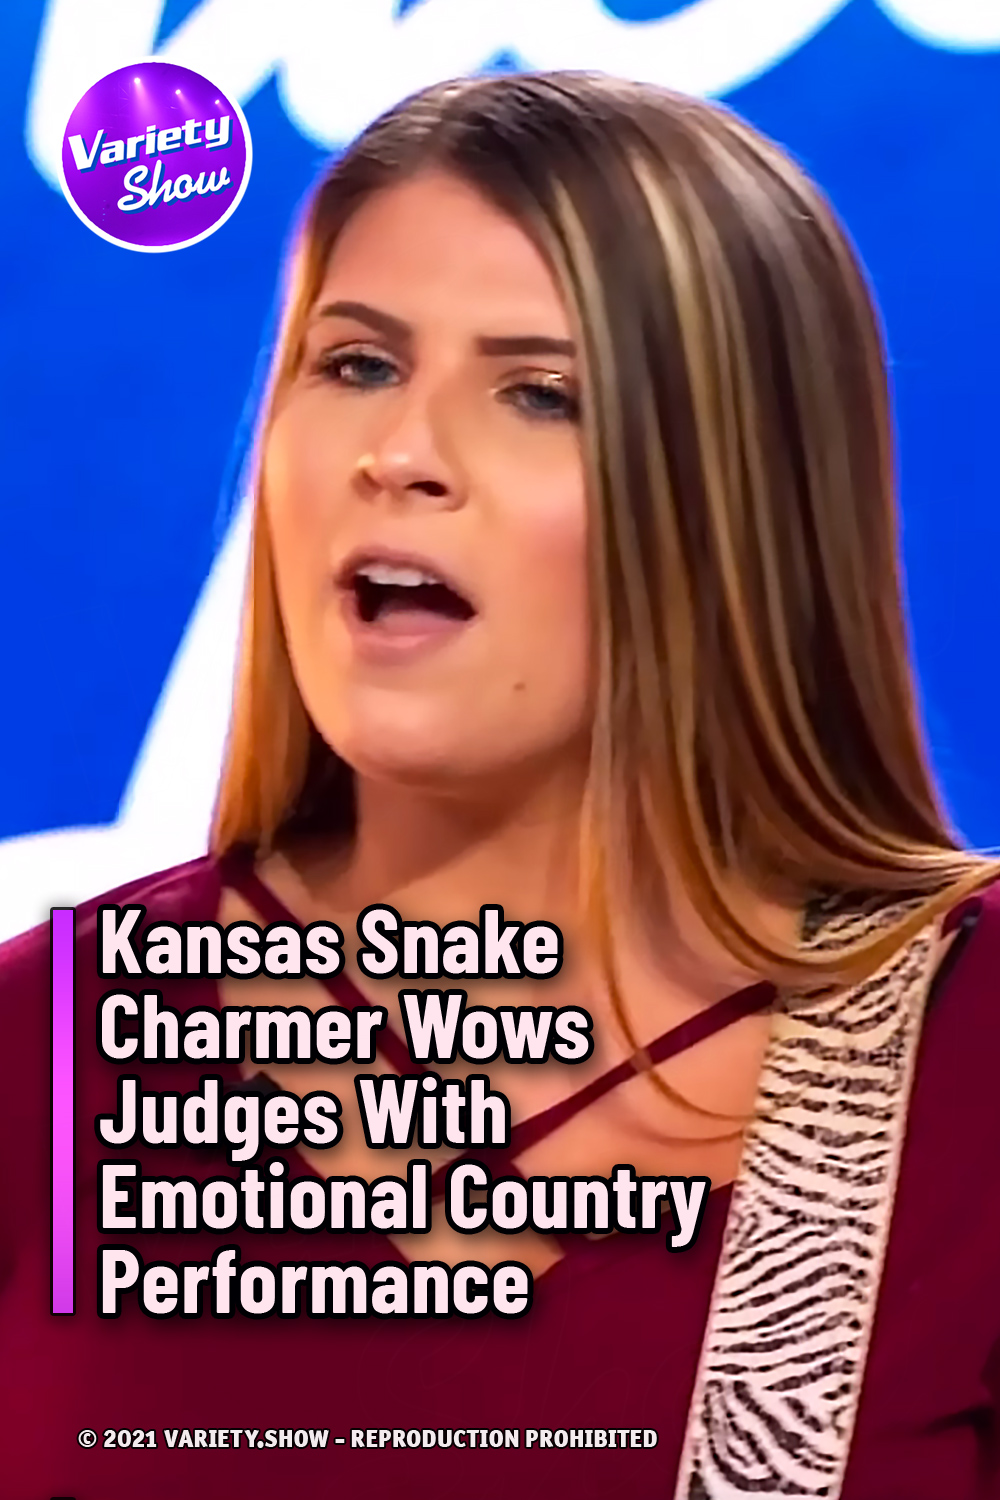 Kansas Snake Charmer Wows Judges With Emotional Country Performance